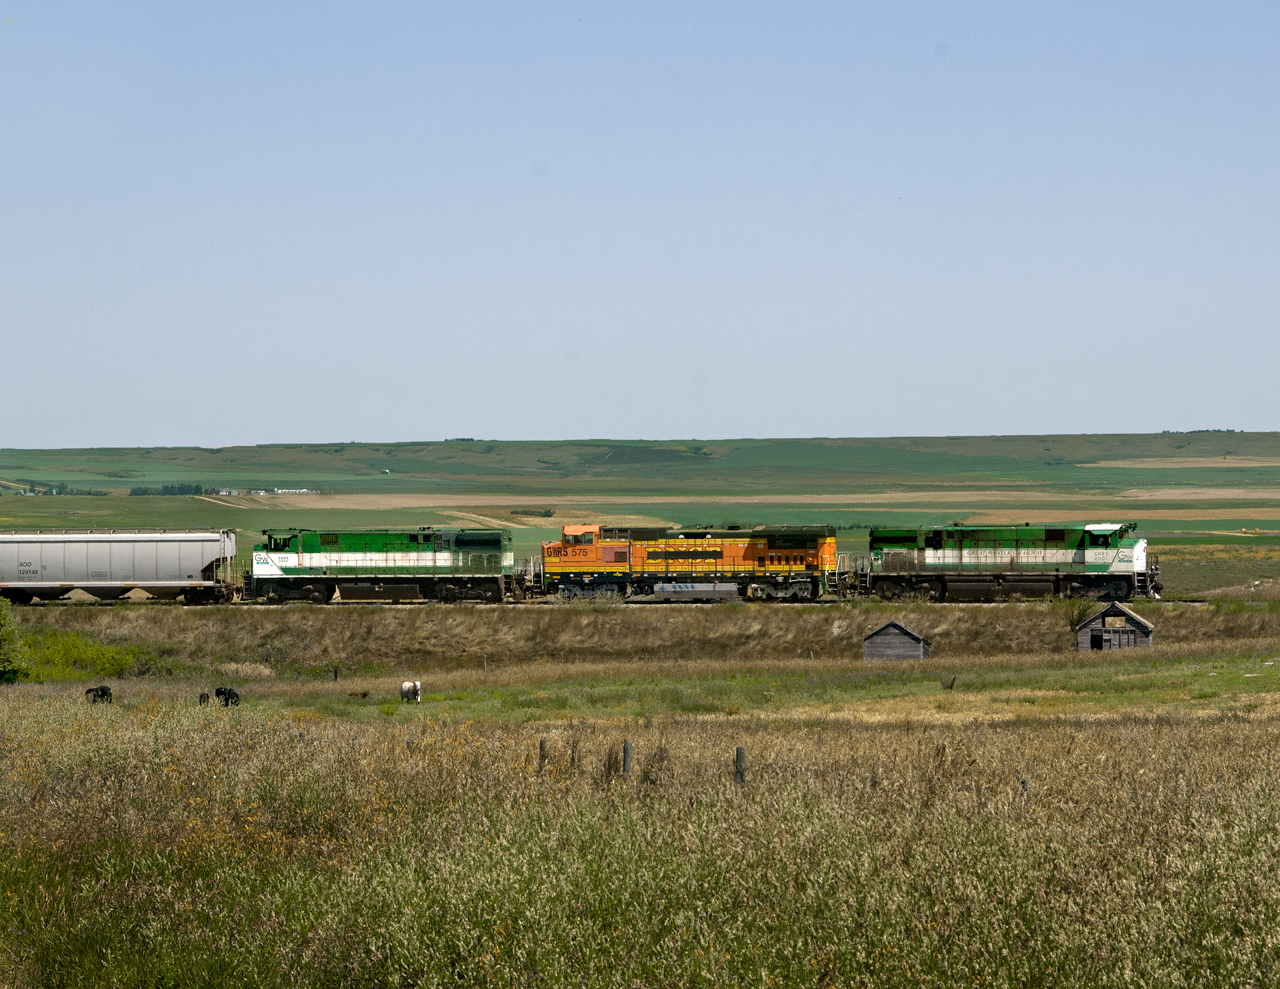 Due to the Expanse Subdivision from Moose Jaw to Assiniboia out of service due to floods, the Great Western was receiving empties at Swift Current and moving trains via Meyronne on the seldom used north end of the Vanguard Sub